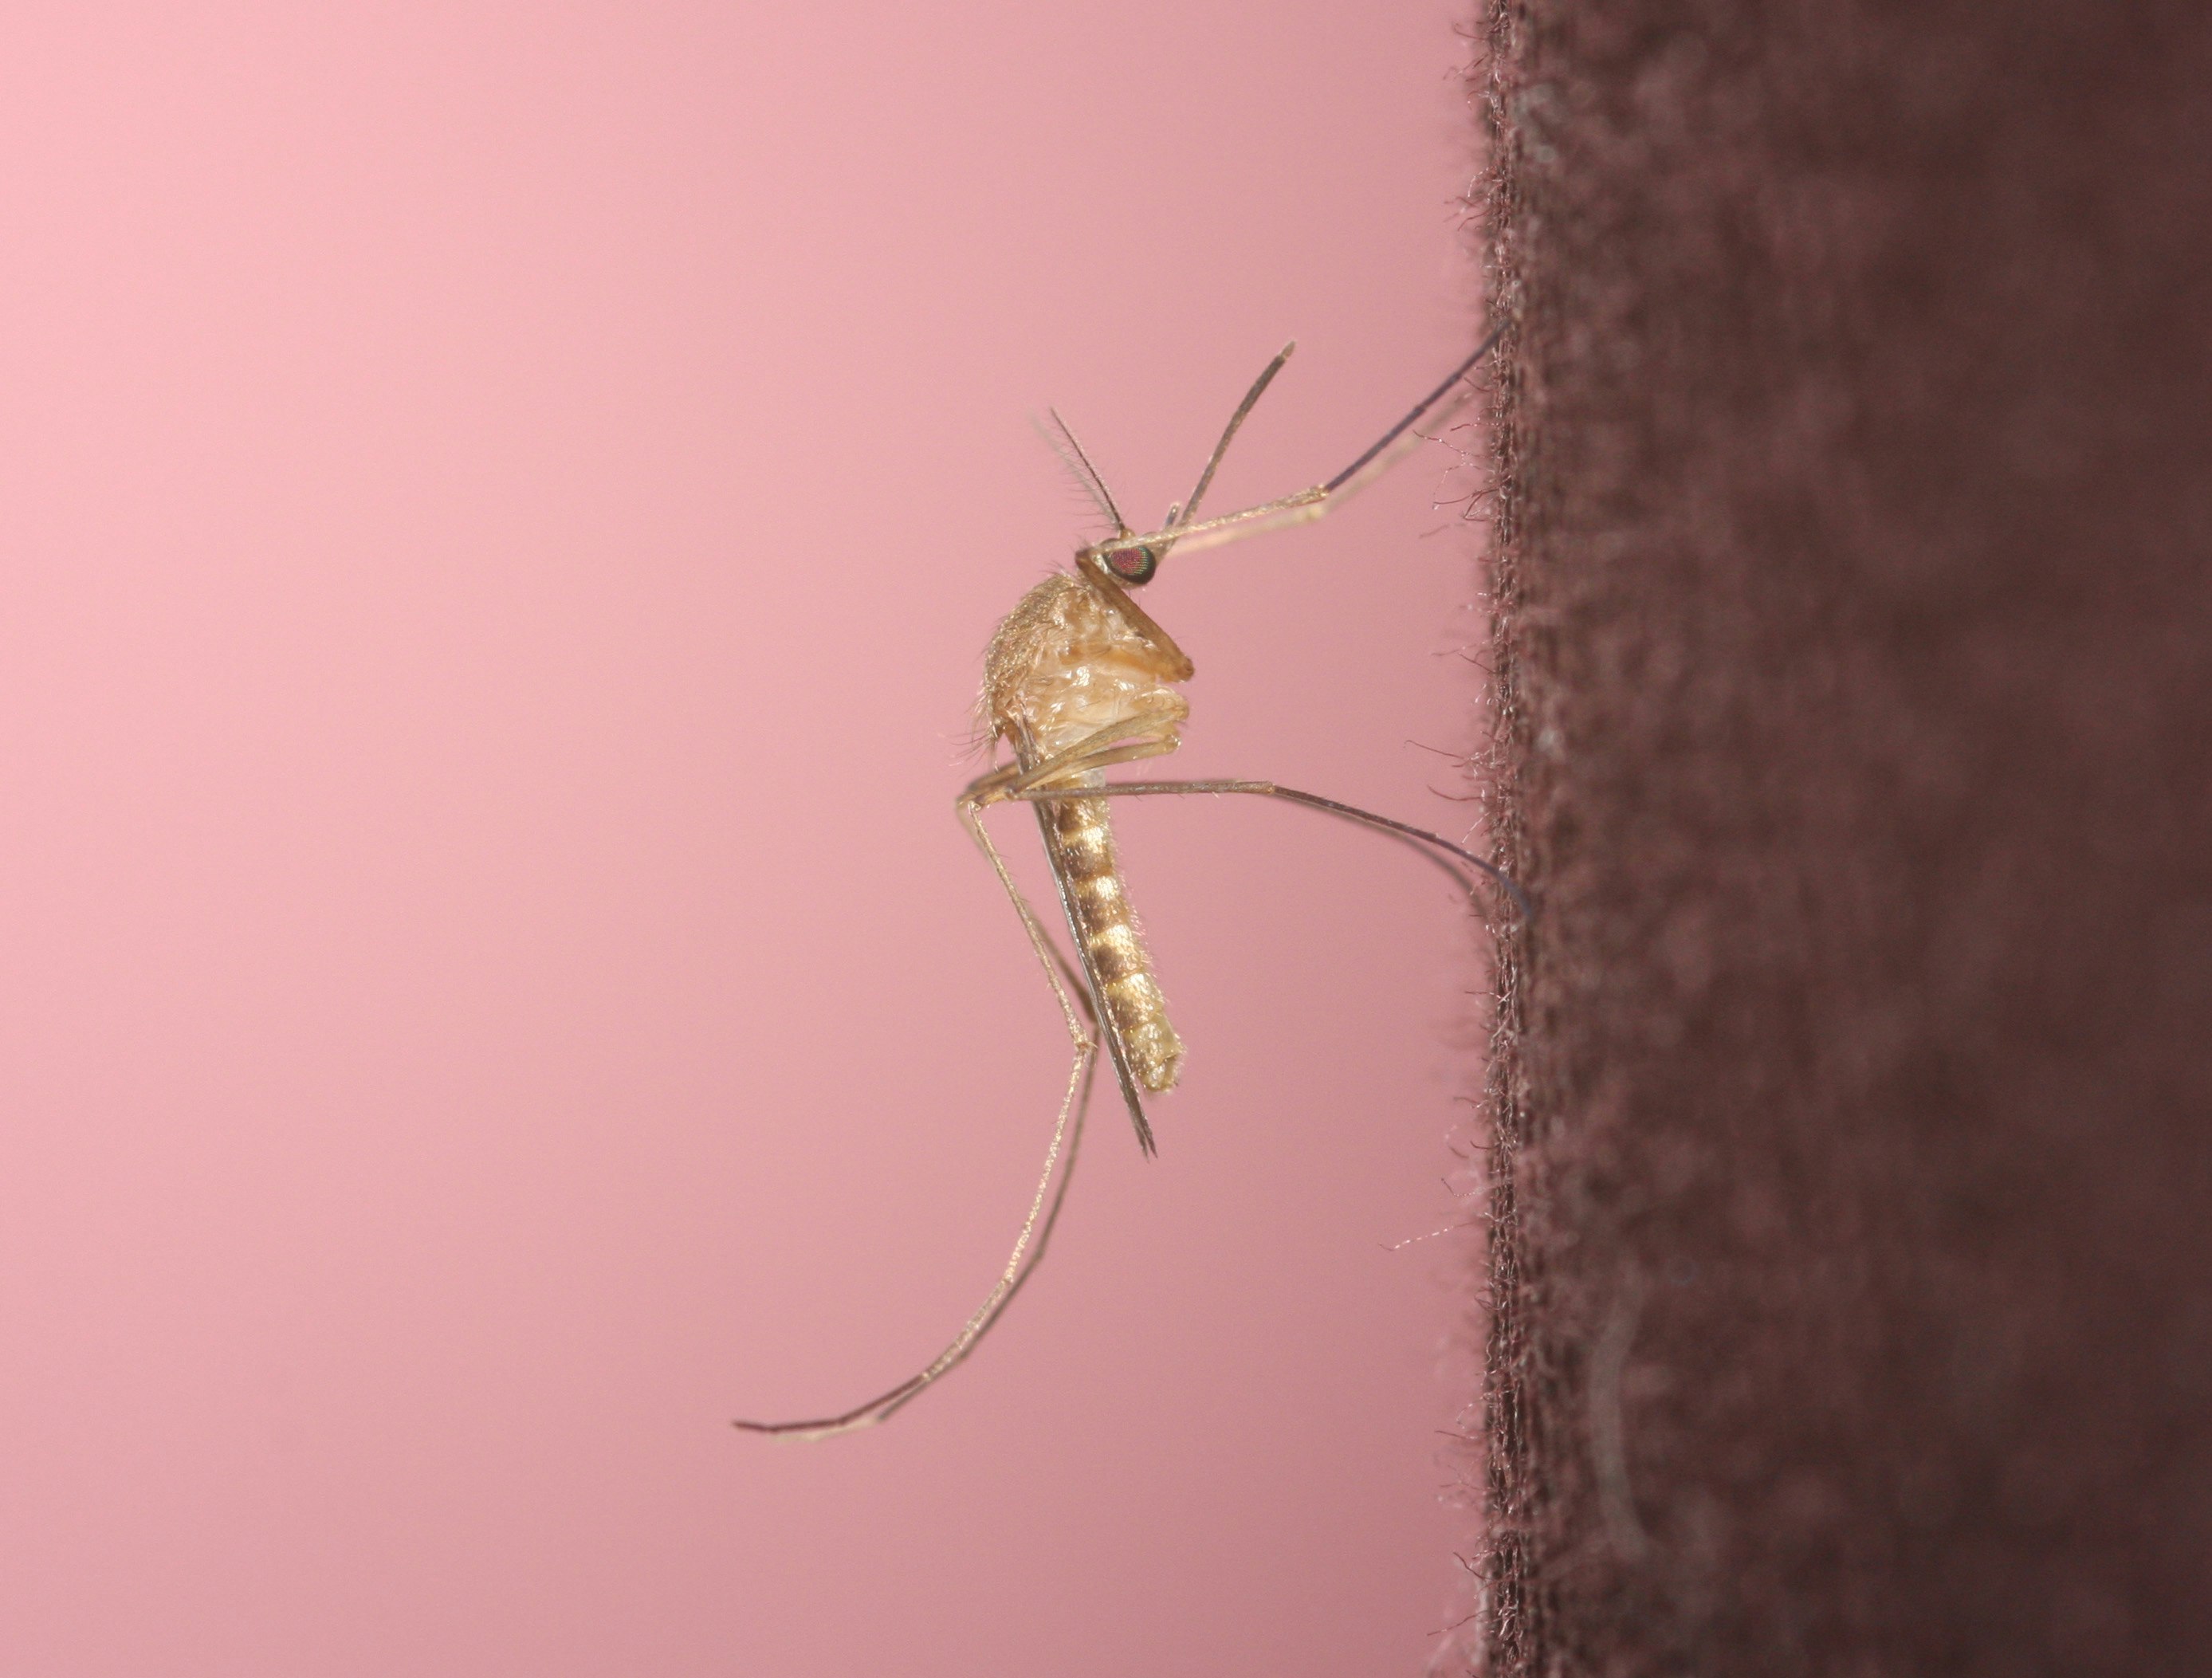 The house mosquito, Culex Pipiens, a common carrier of West Nile Virus